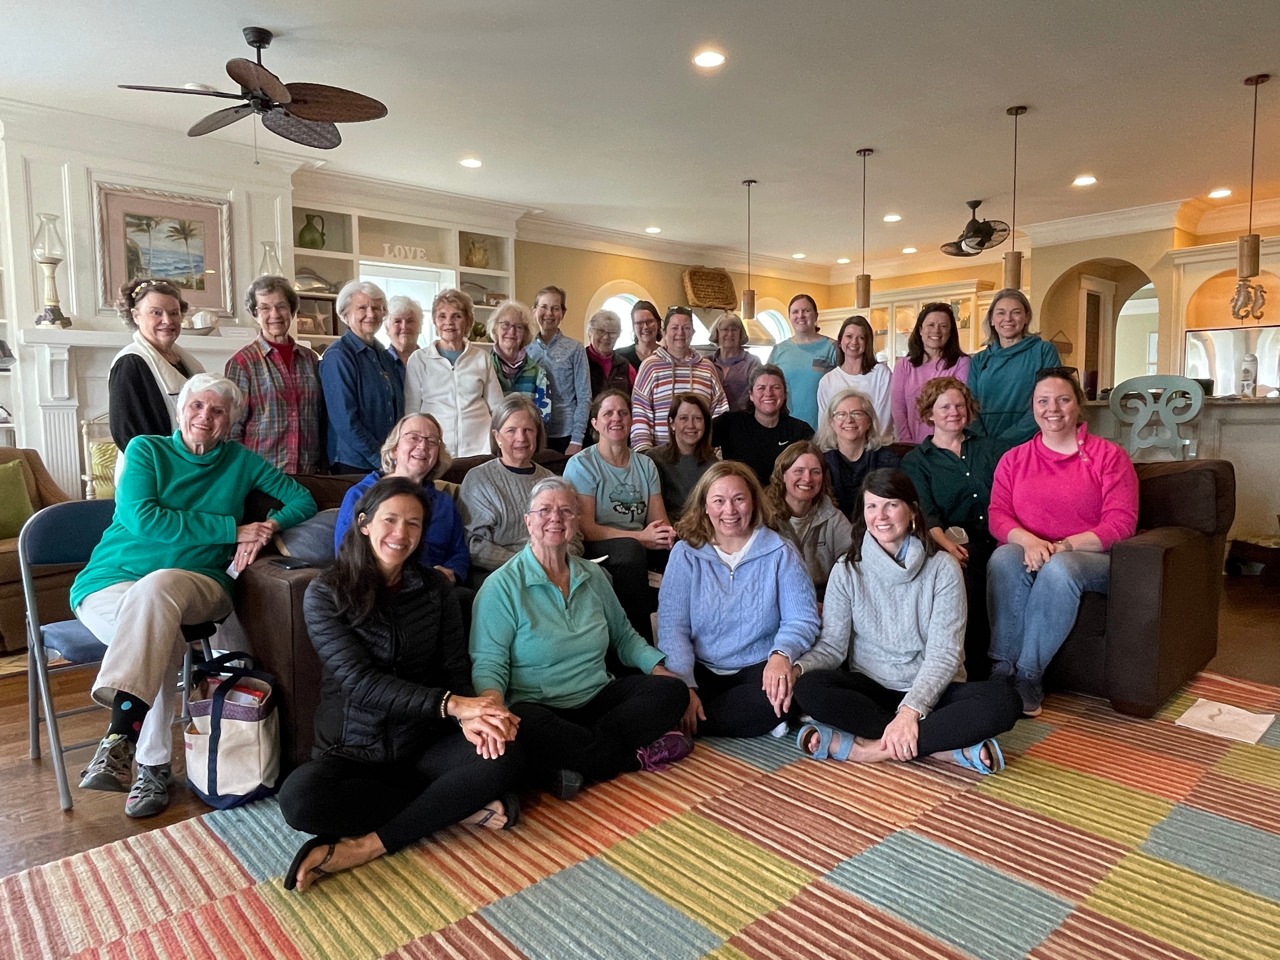 A group of friends of varying ages on a women's church retreat, posing for a photo in a cozy room at a beach house, radiating an atmosphere of inclusion.